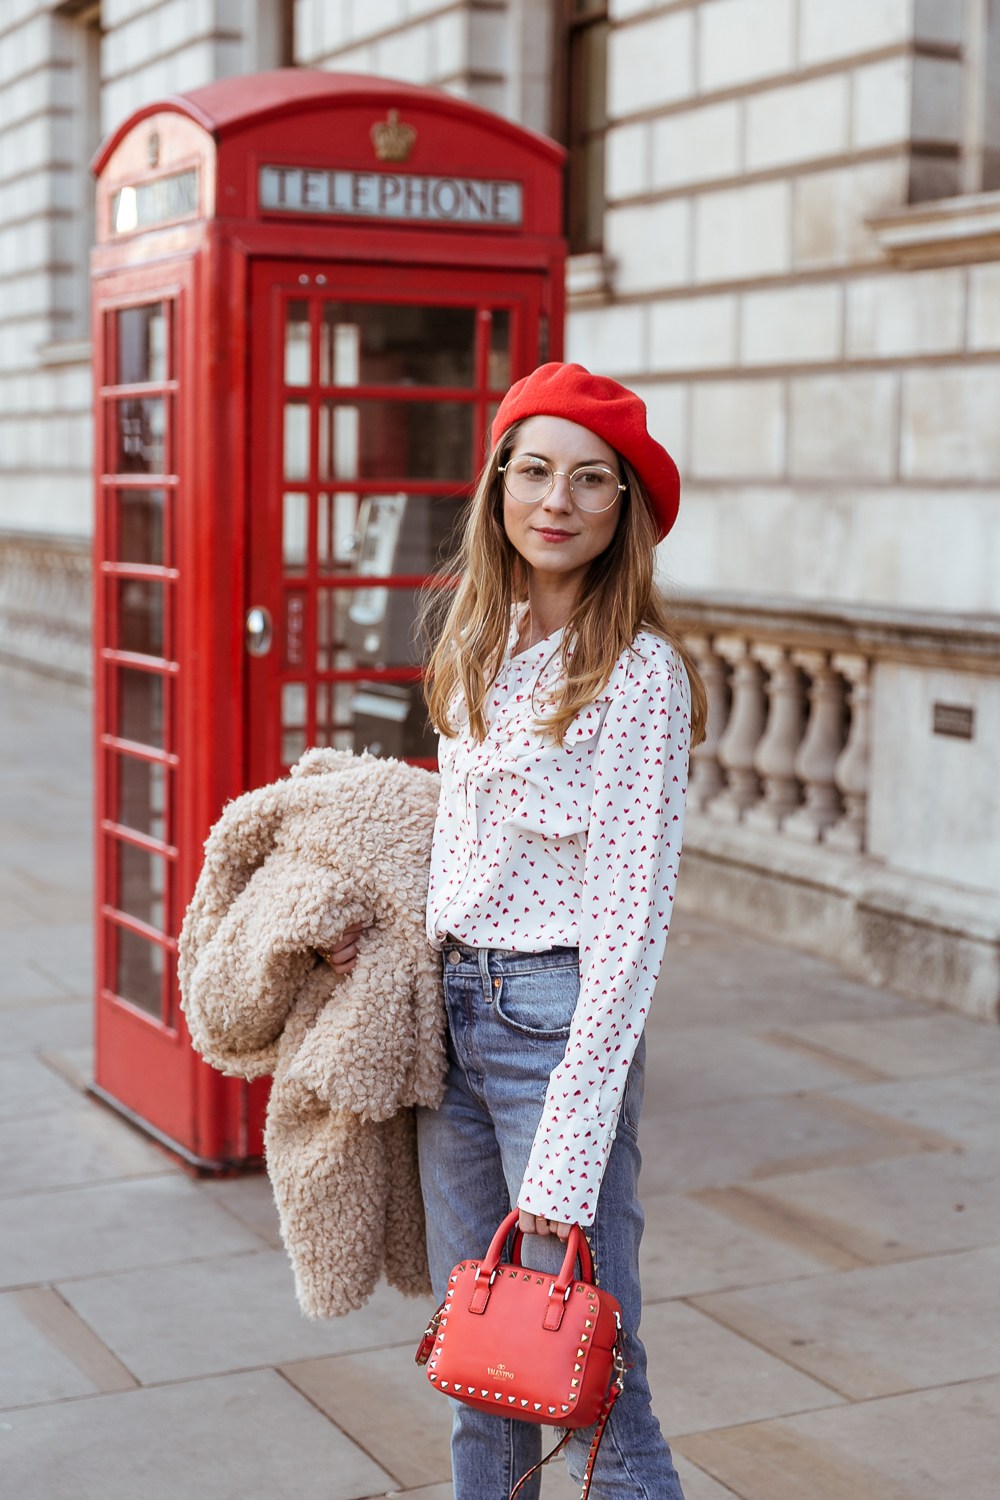 teddy coat levis 501 jeans red hat steffen schraut blouse hearts red valentino bag outfit street style london white boots veja du fashion